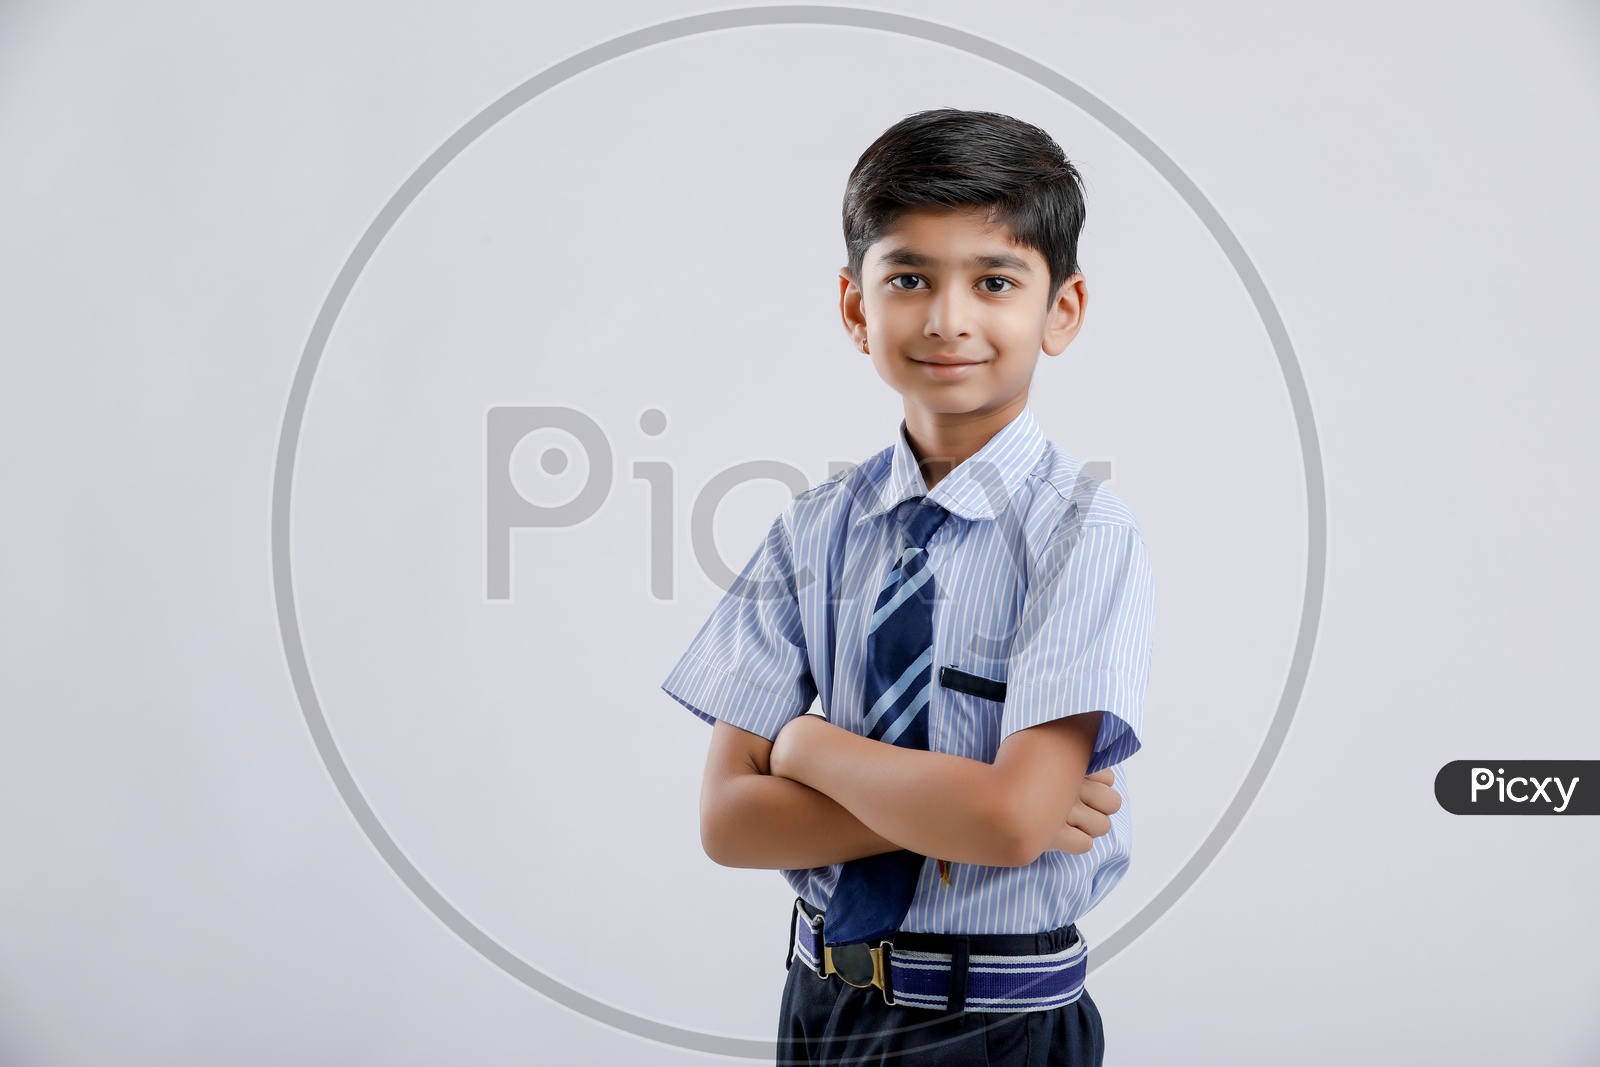 Cute Indian or Asian Kid Or Boy In School Uniform And Posing Over an Isolated White Background